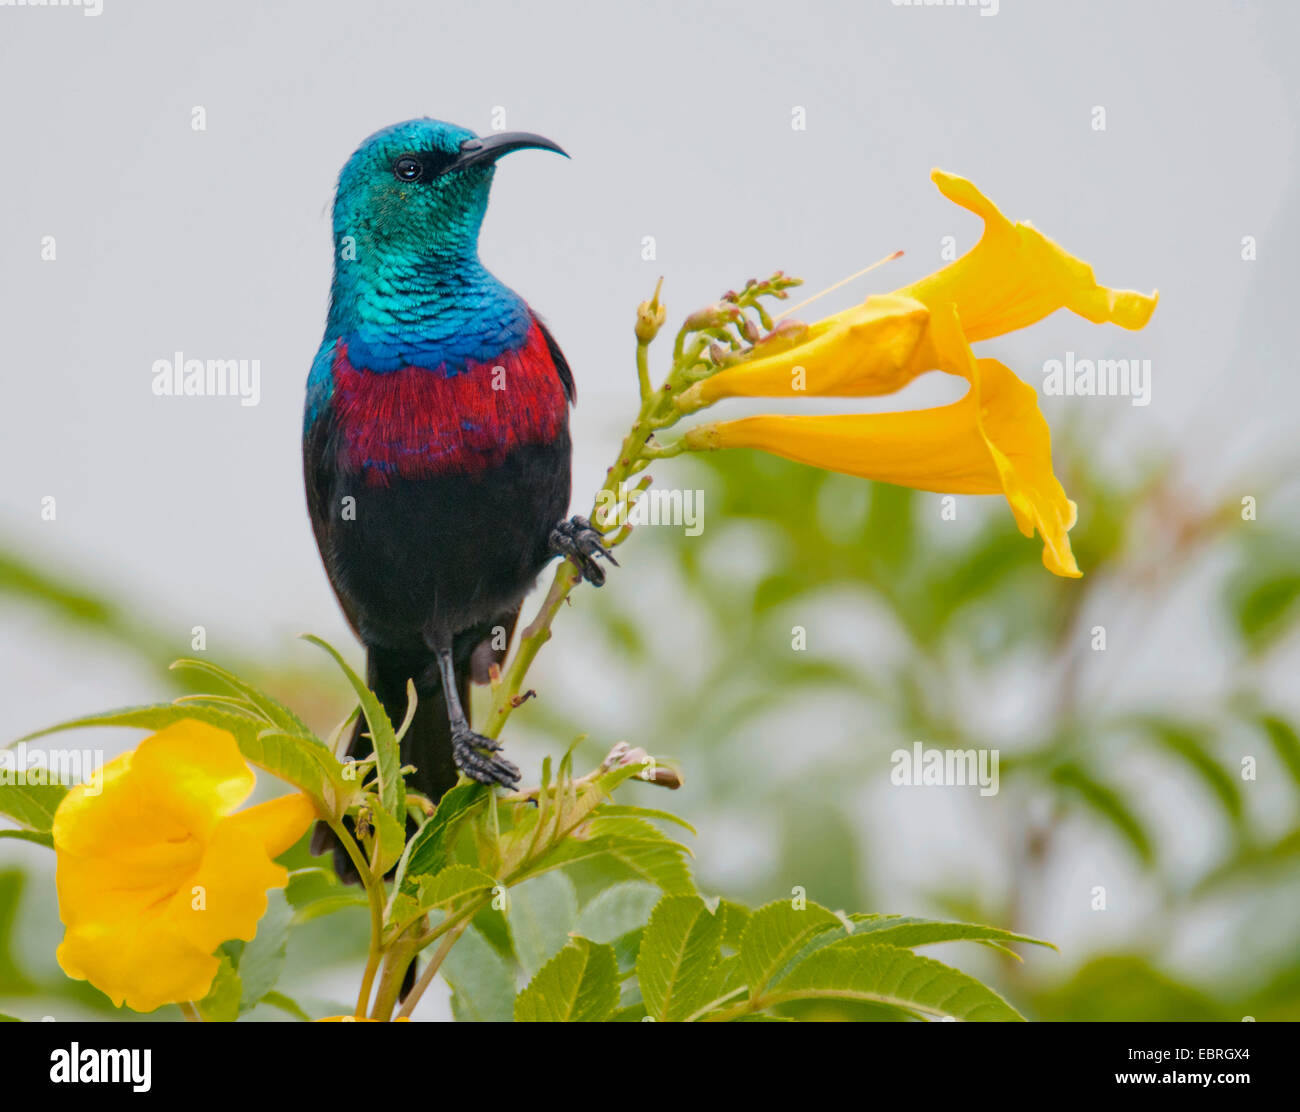 Red-chested Sunbird, Red chested Sunbird (Cinnyris erythrocerca), sitting at stem with yellow blossoms, Uganda, Queen Elizabeth National Park Stock Photo